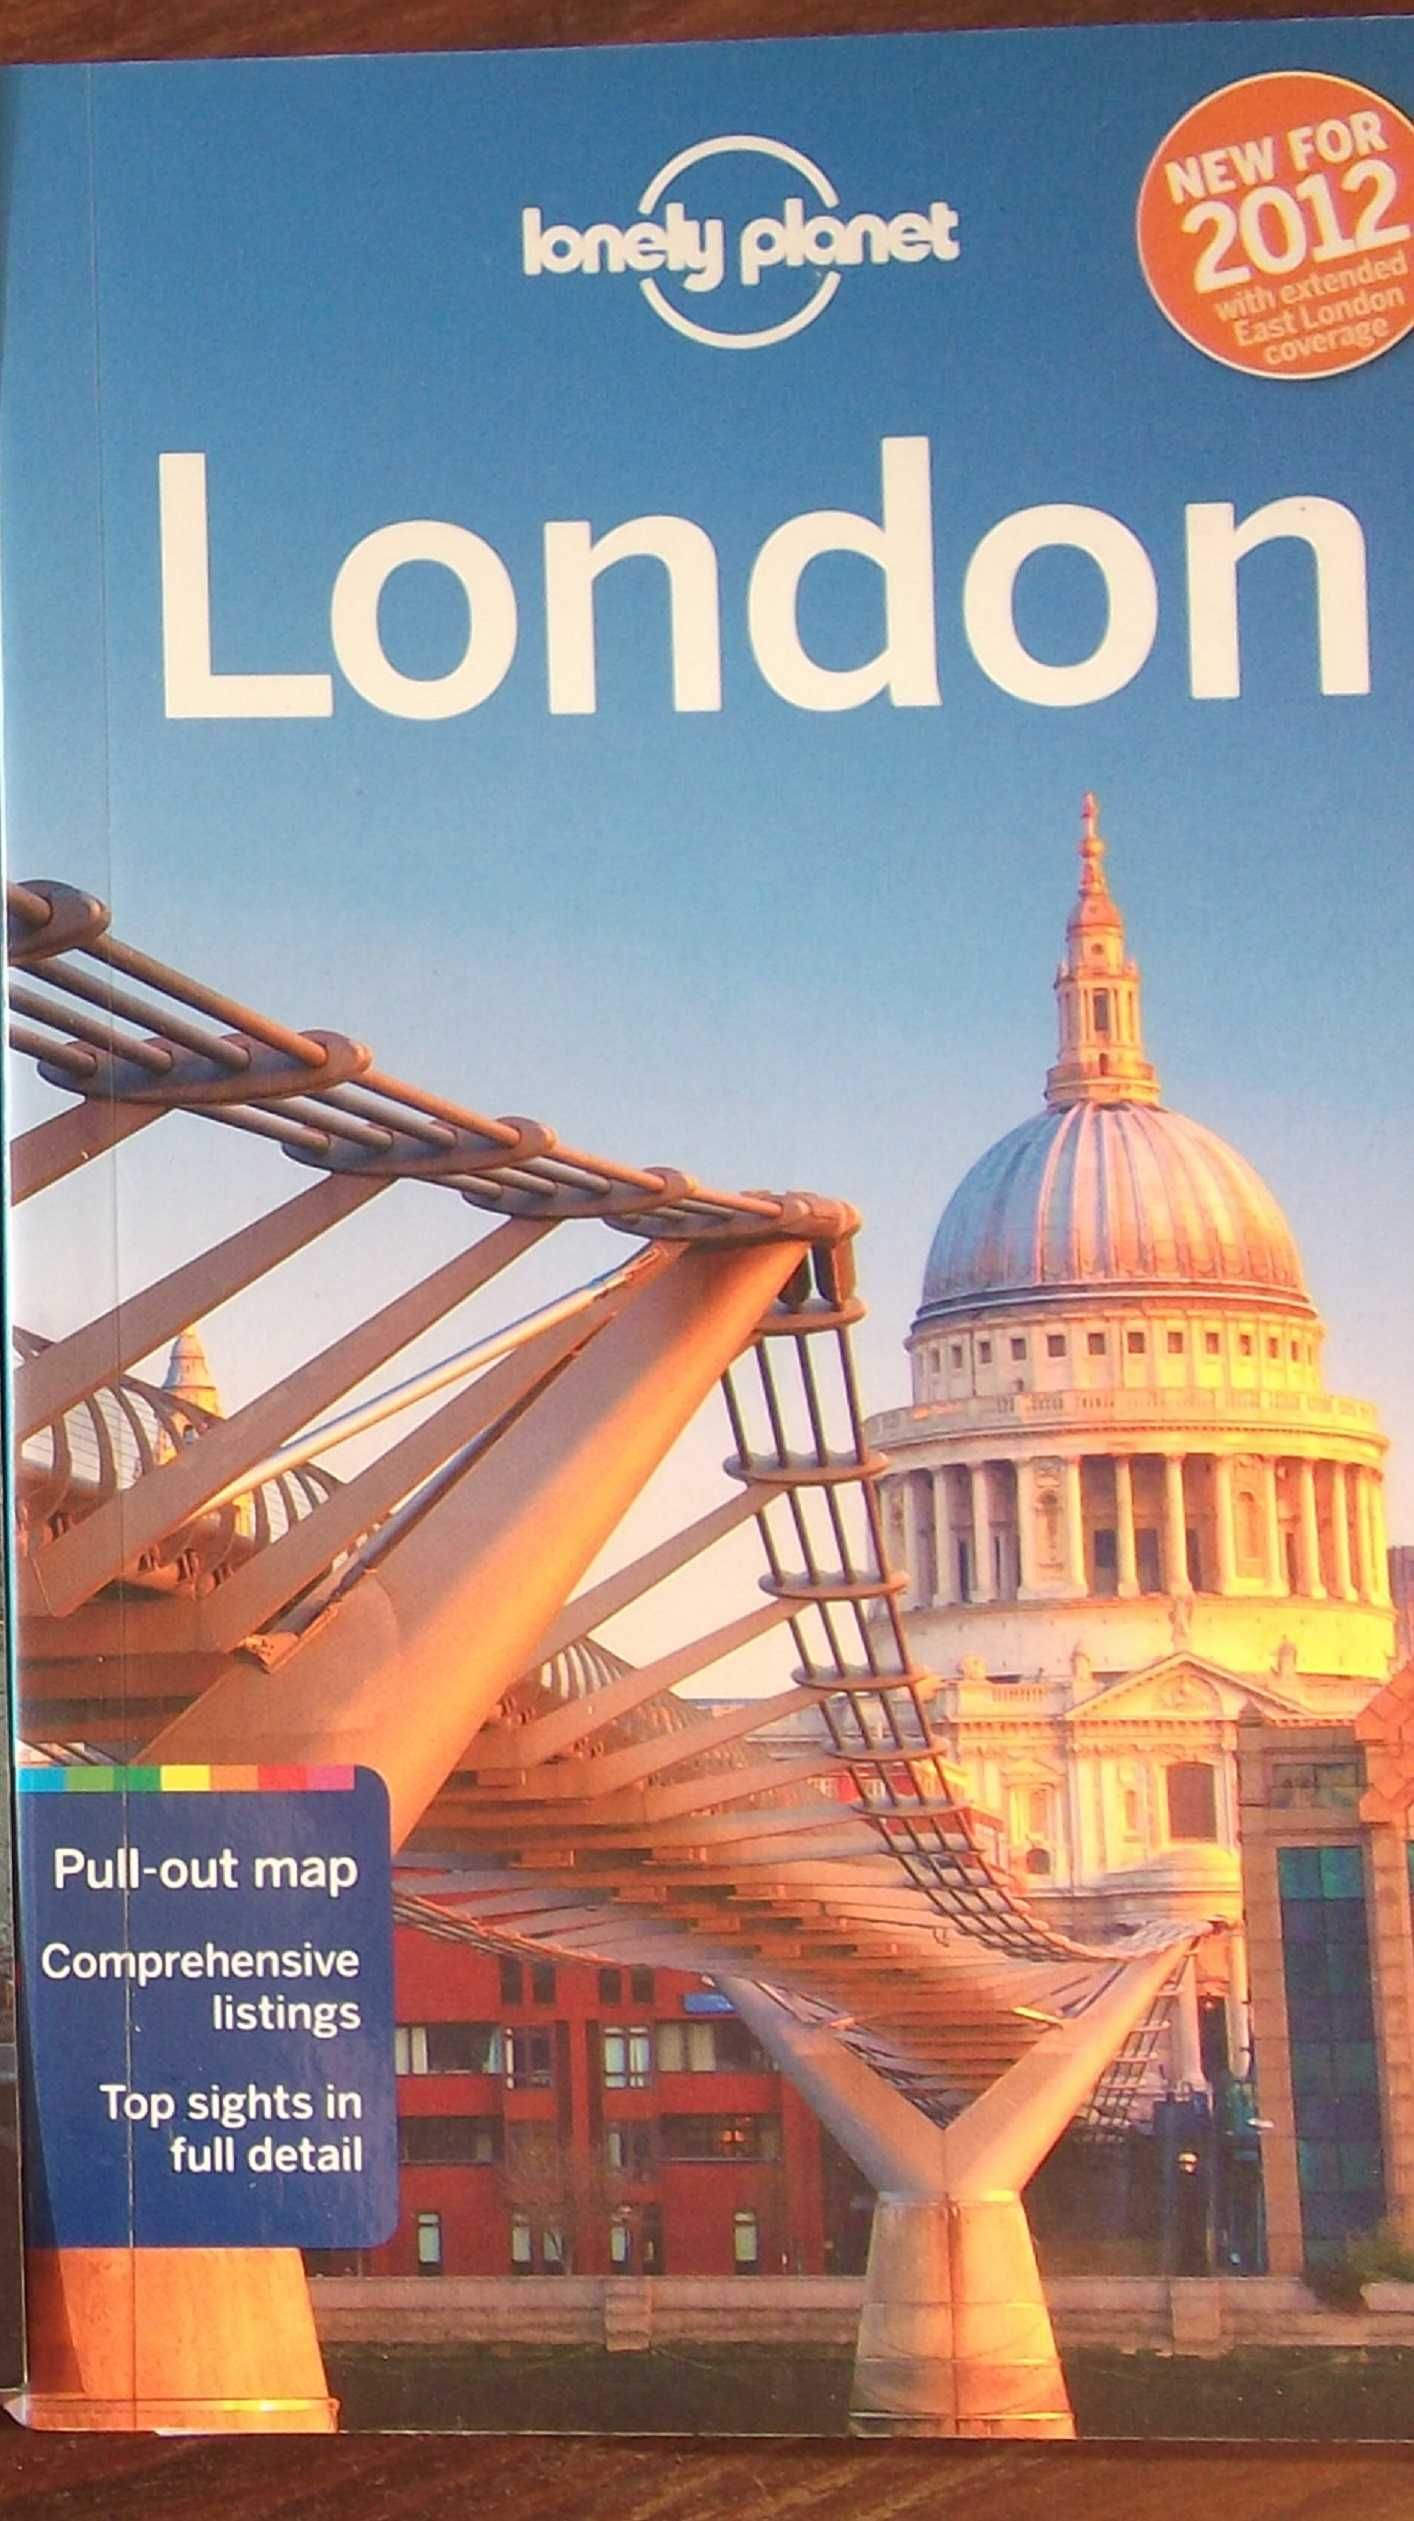 Guia Lonely Planet London / English travel guide London